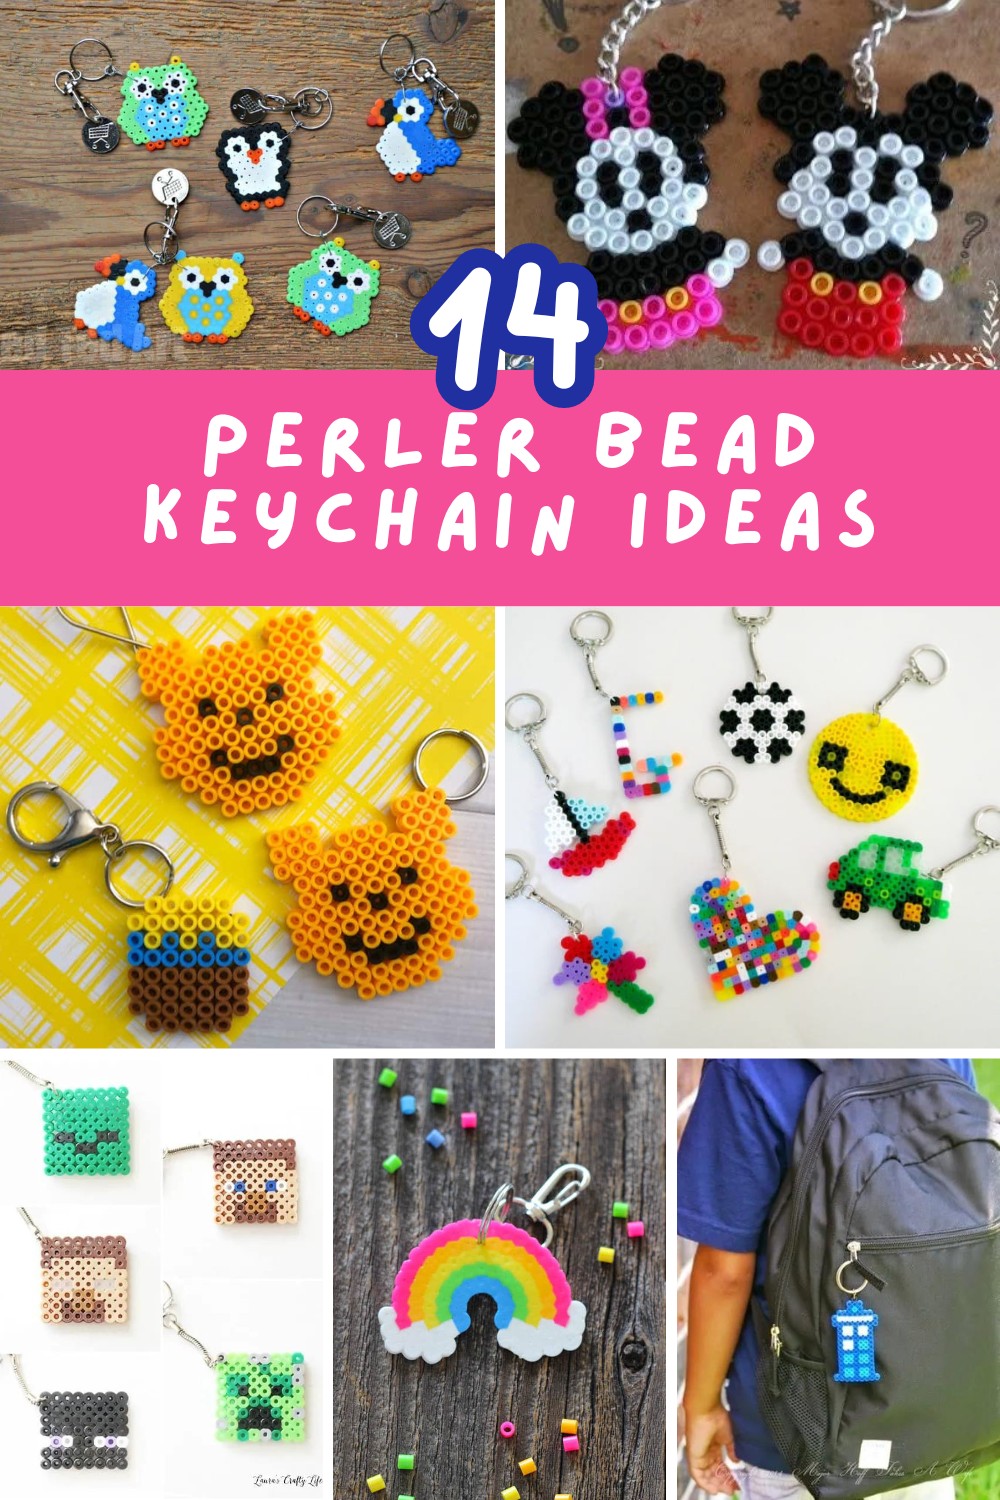 Get ready for back-to-school with these adorable Perler bead keychains! 🎒✨ Perfect for adding a personal touch to your backpack or gifting to friends. Dive into this fun and creative project that'll make your school gear stand out. #BackToSchoolCrafts #DIYKeychains #CraftIdeas

